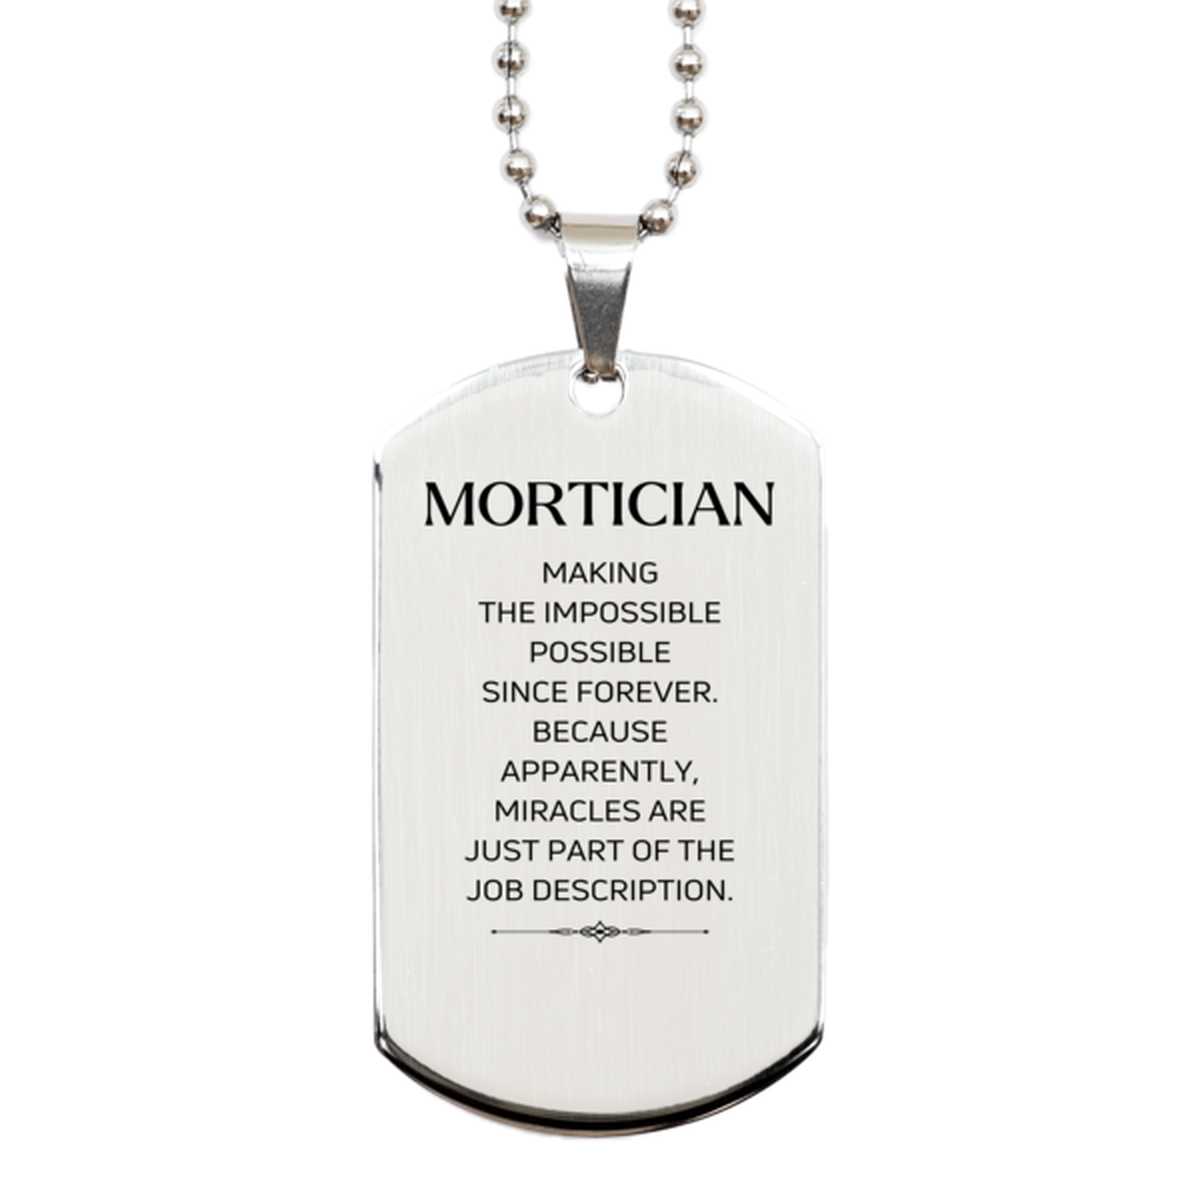 Funny Mortician Gifts, Miracles are just part of the job description, Inspirational Birthday Silver Dog Tag For Mortician, Men, Women, Coworkers, Friends, Boss